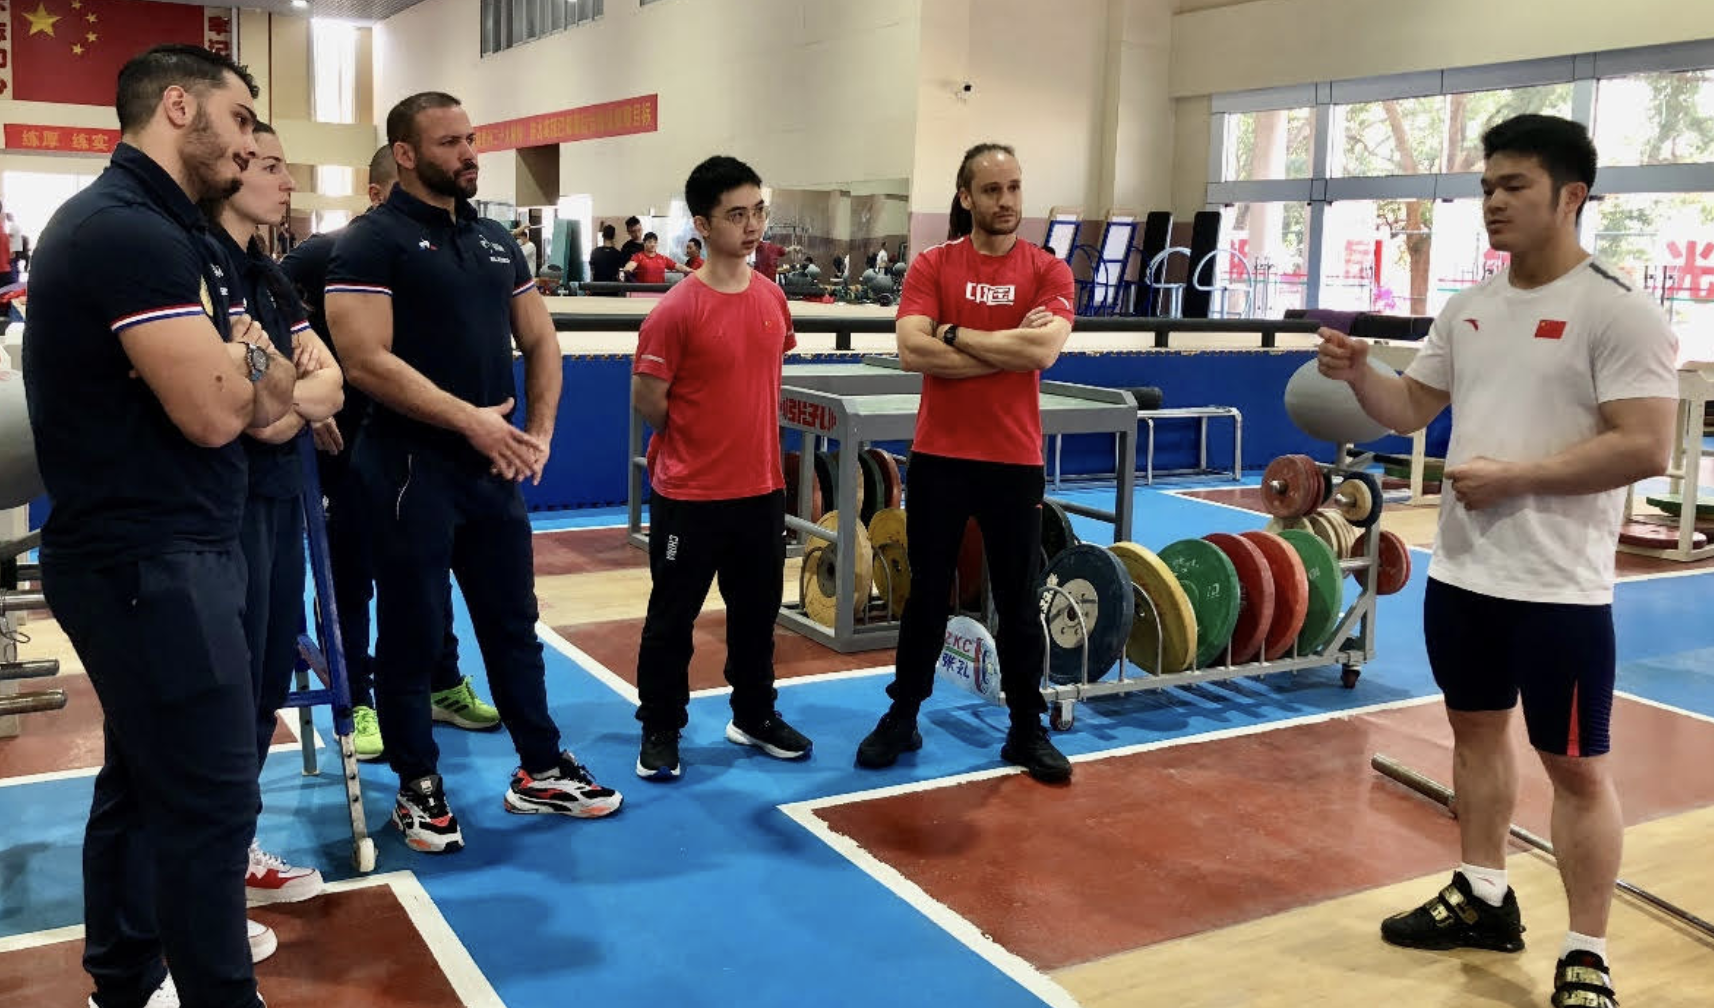 French weightlifters take "springboard to Paris podium" at training camp in China